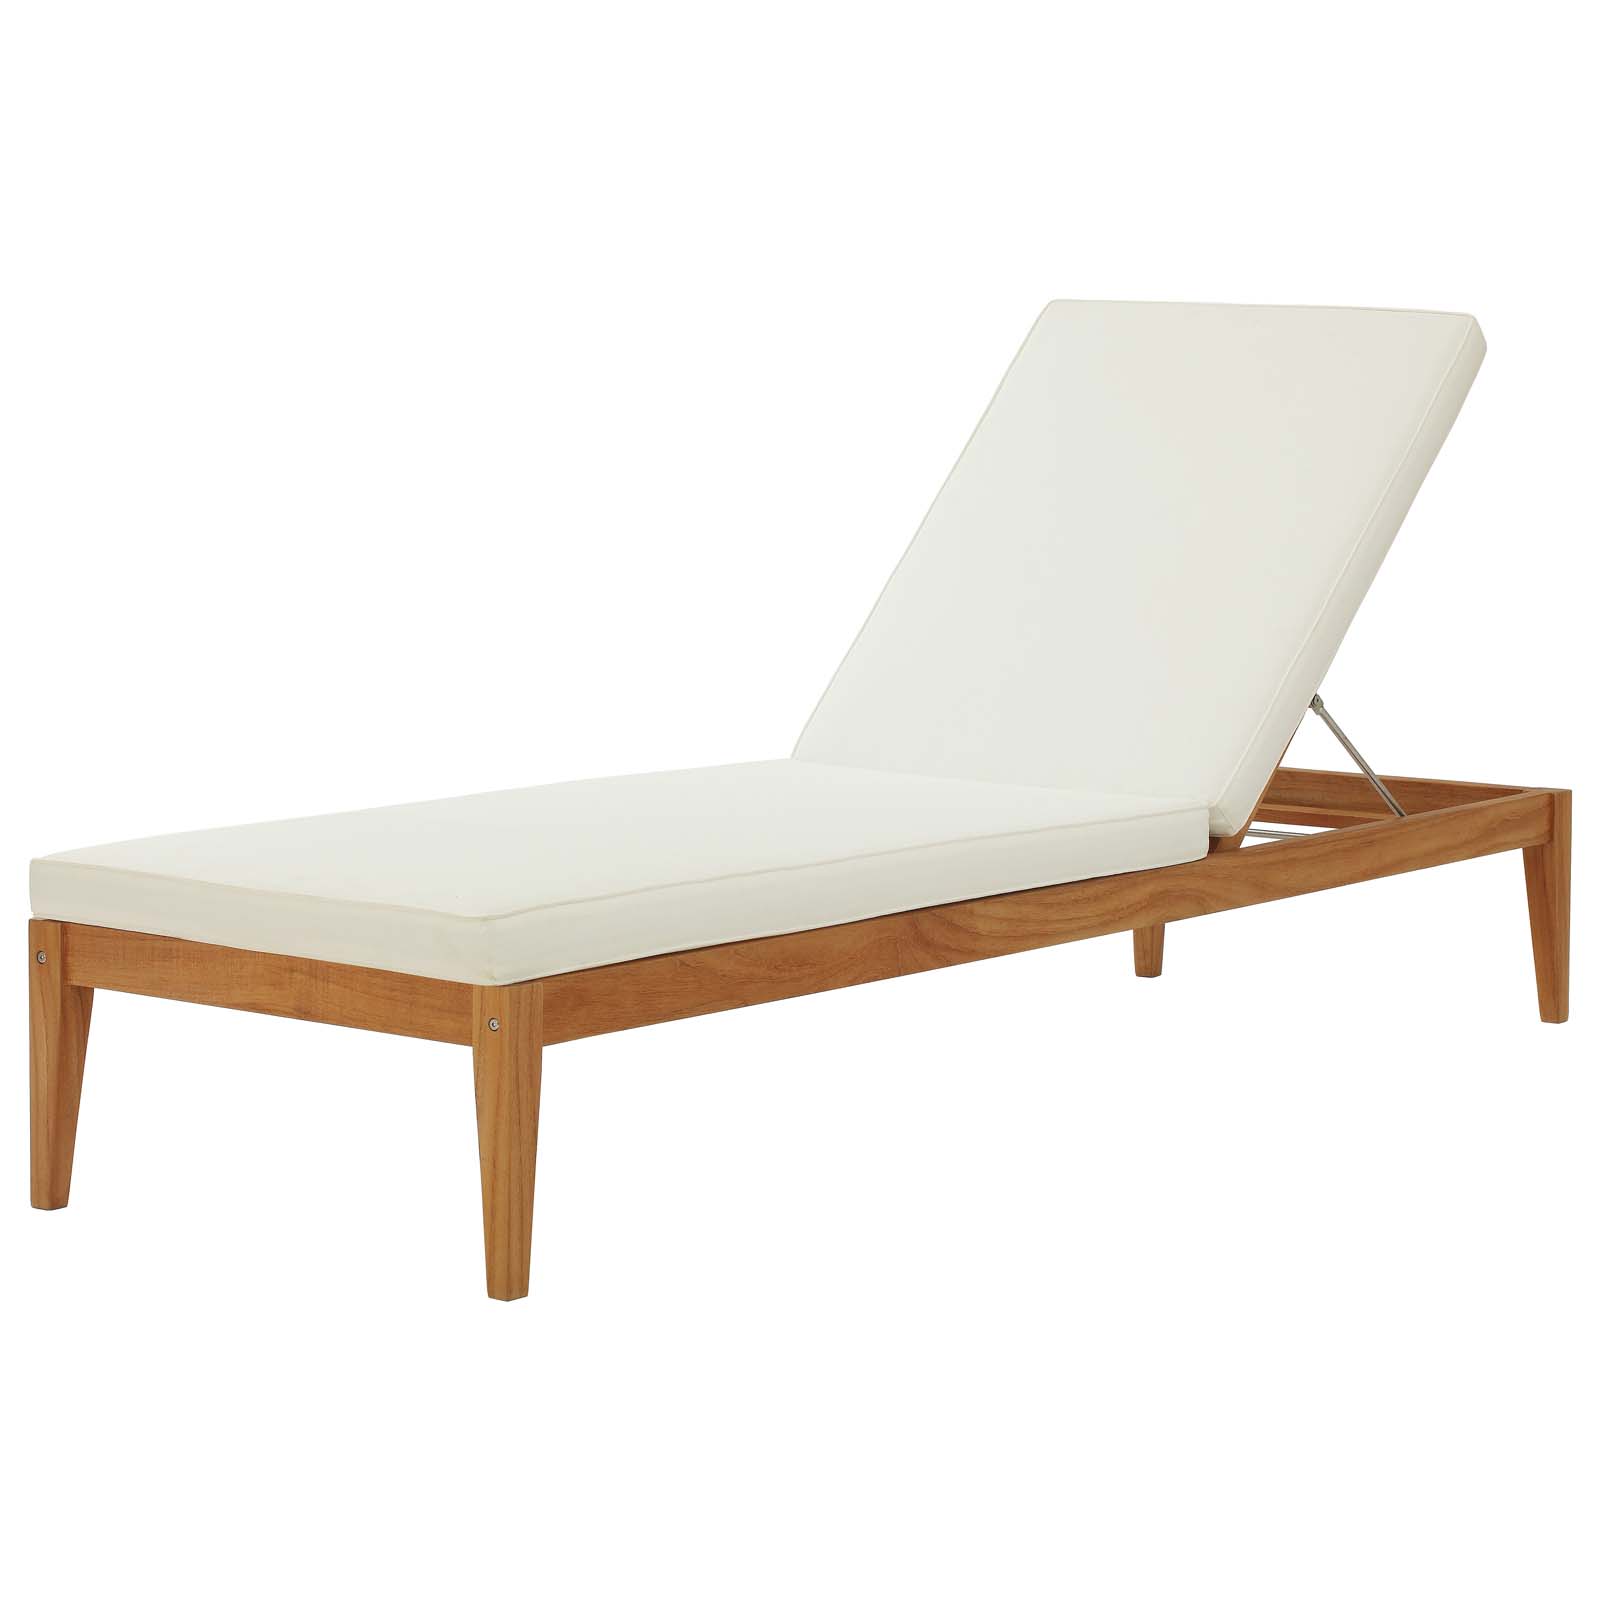 Contemporary Modern Urban Designer Outdoor Patio Balcony Garden Furniture Lounge Chaise Chair and SideTable Set, Wood, Natural White - image 3 of 9